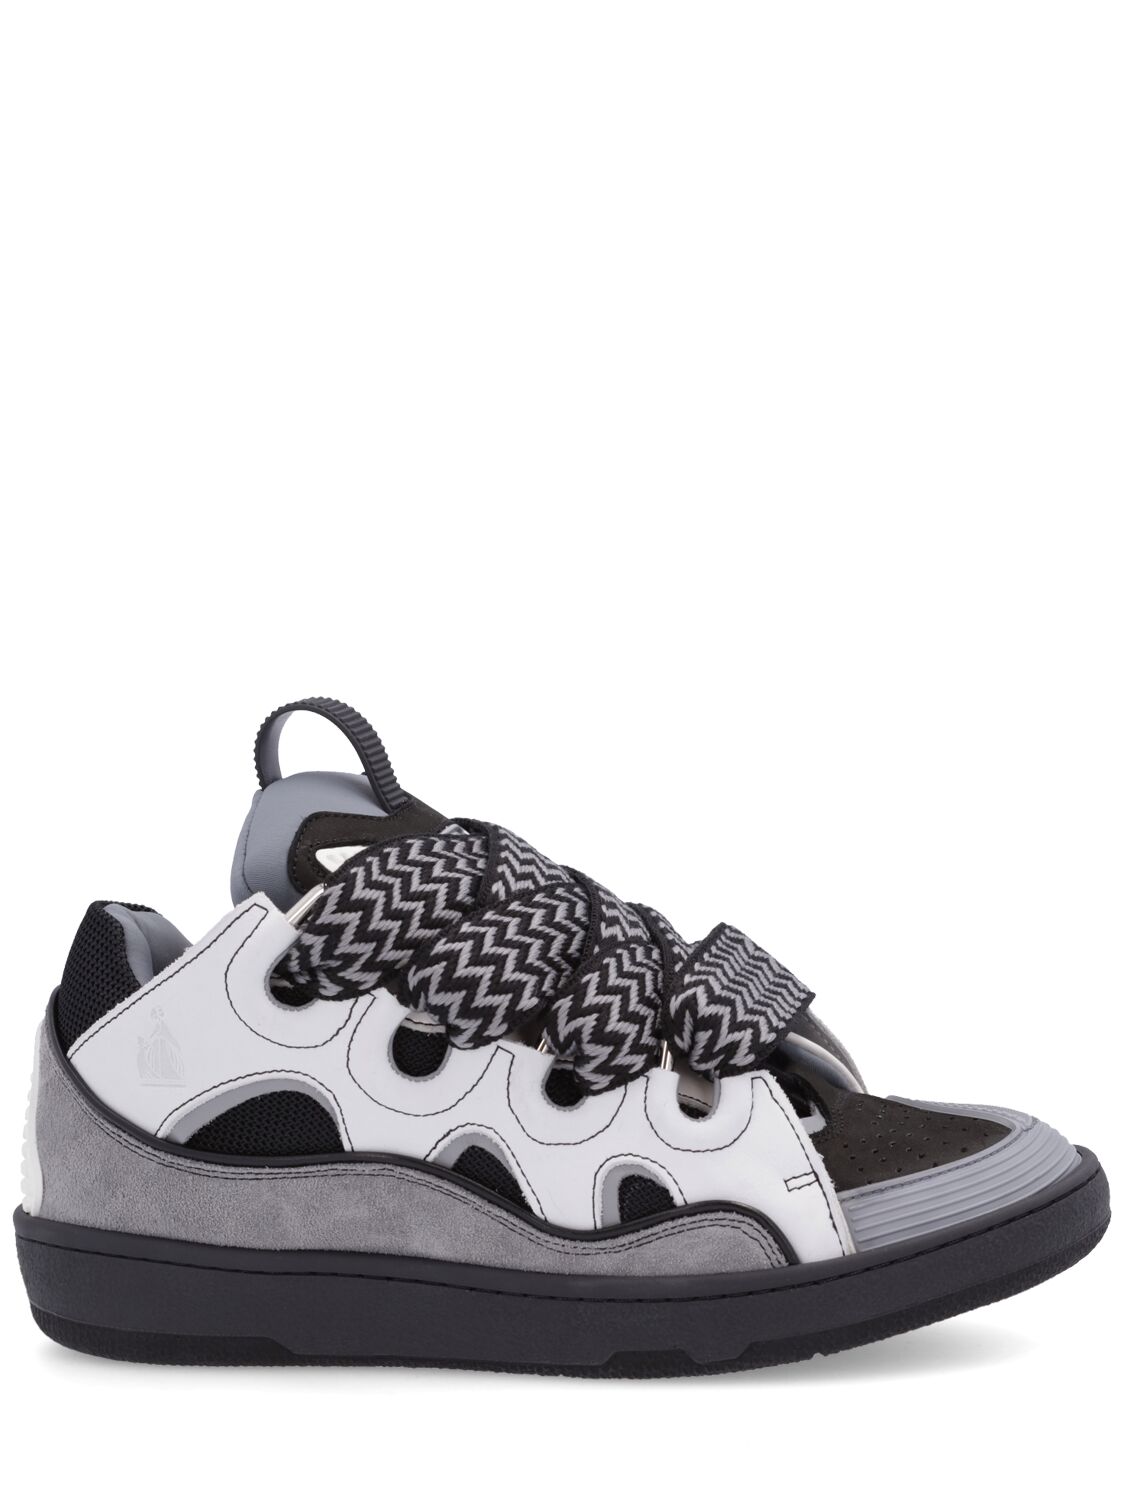 LANVIN CURB LEATHER SNEAKERS